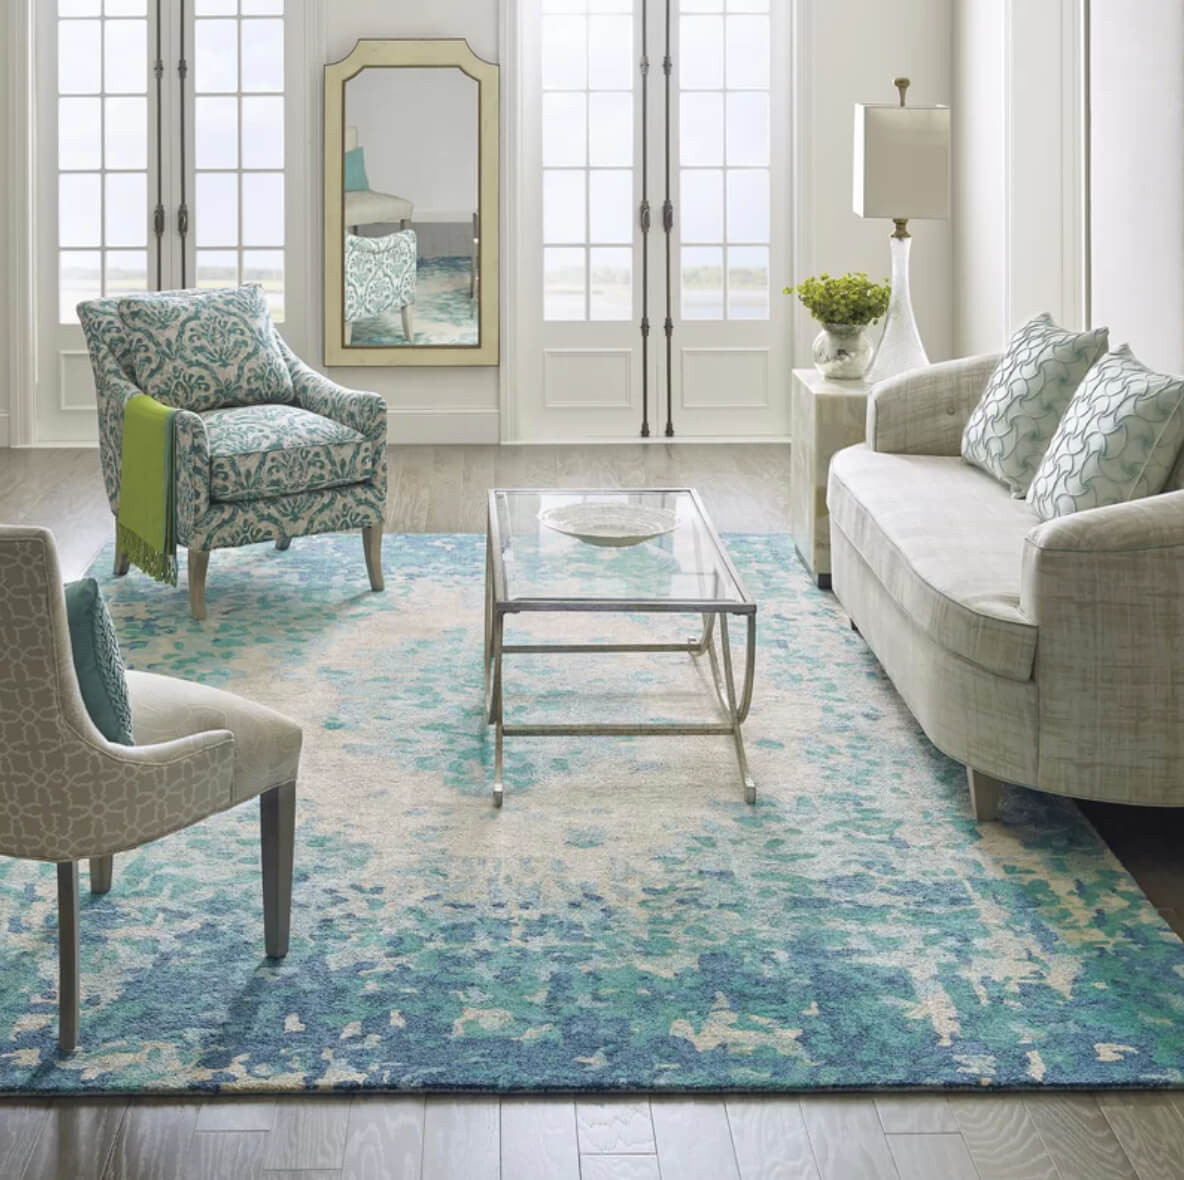 Living Room With Rug
 12 Living Room Rug Ideas That Will Change Everything